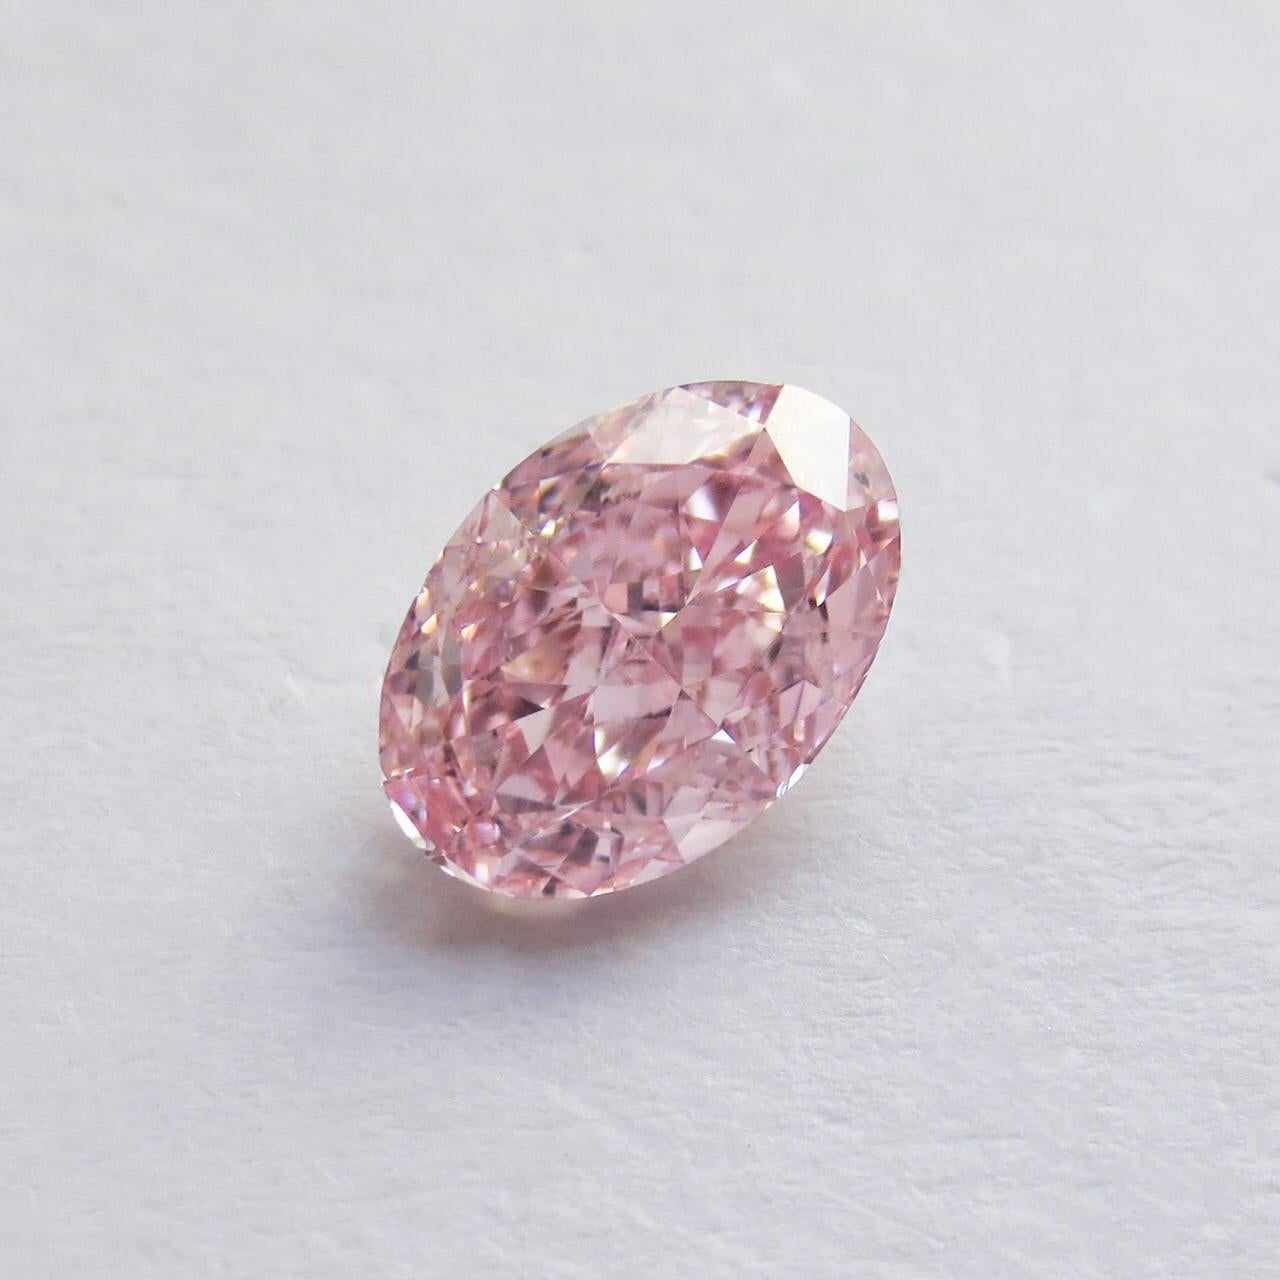 From the Emilio Jewelry Museum Vault, Showcasing a stunning loose Gia certified 1.00 carat natural fancy intense pure pink diamond. This diamond is exceptional because according to the Gia report it is a pure intense pink color, with no overtone 